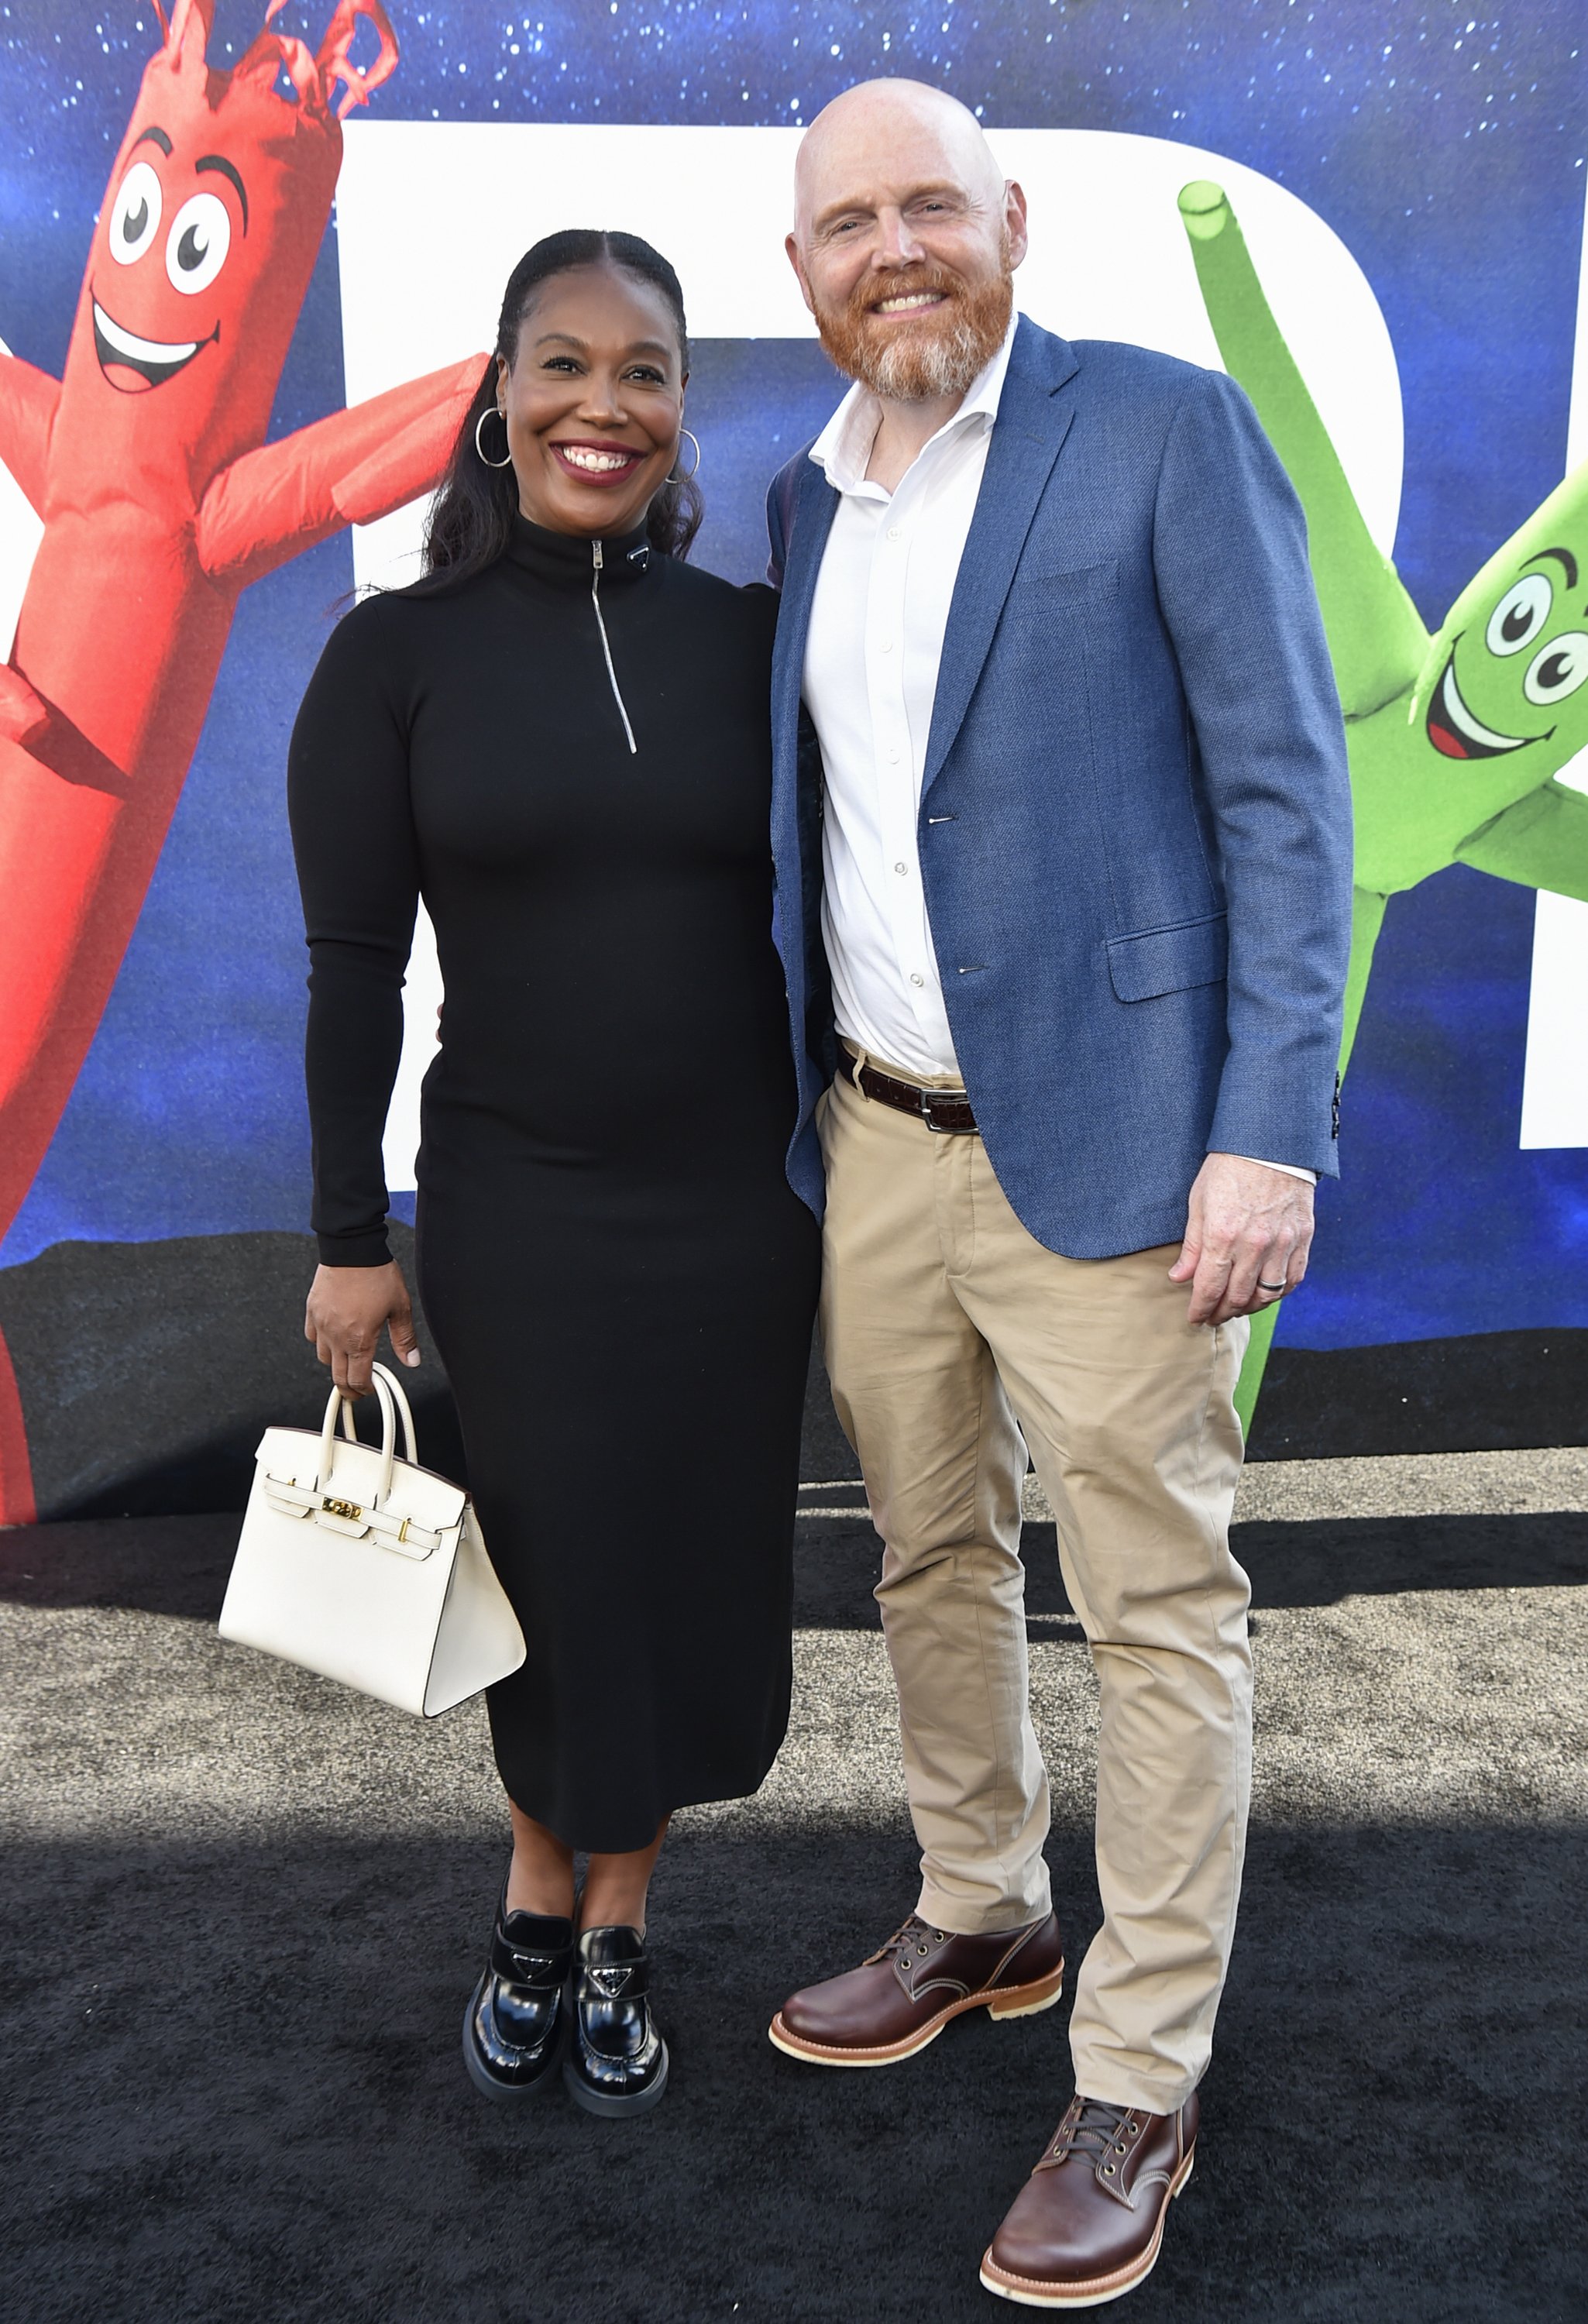 Nia Renée Hill and Bill Burr attend the world premiere of Universal Pictures' "NOPE" at TCL Chinese Theatre on July 18, 2022, in Hollywood, California | Source: Getty Images